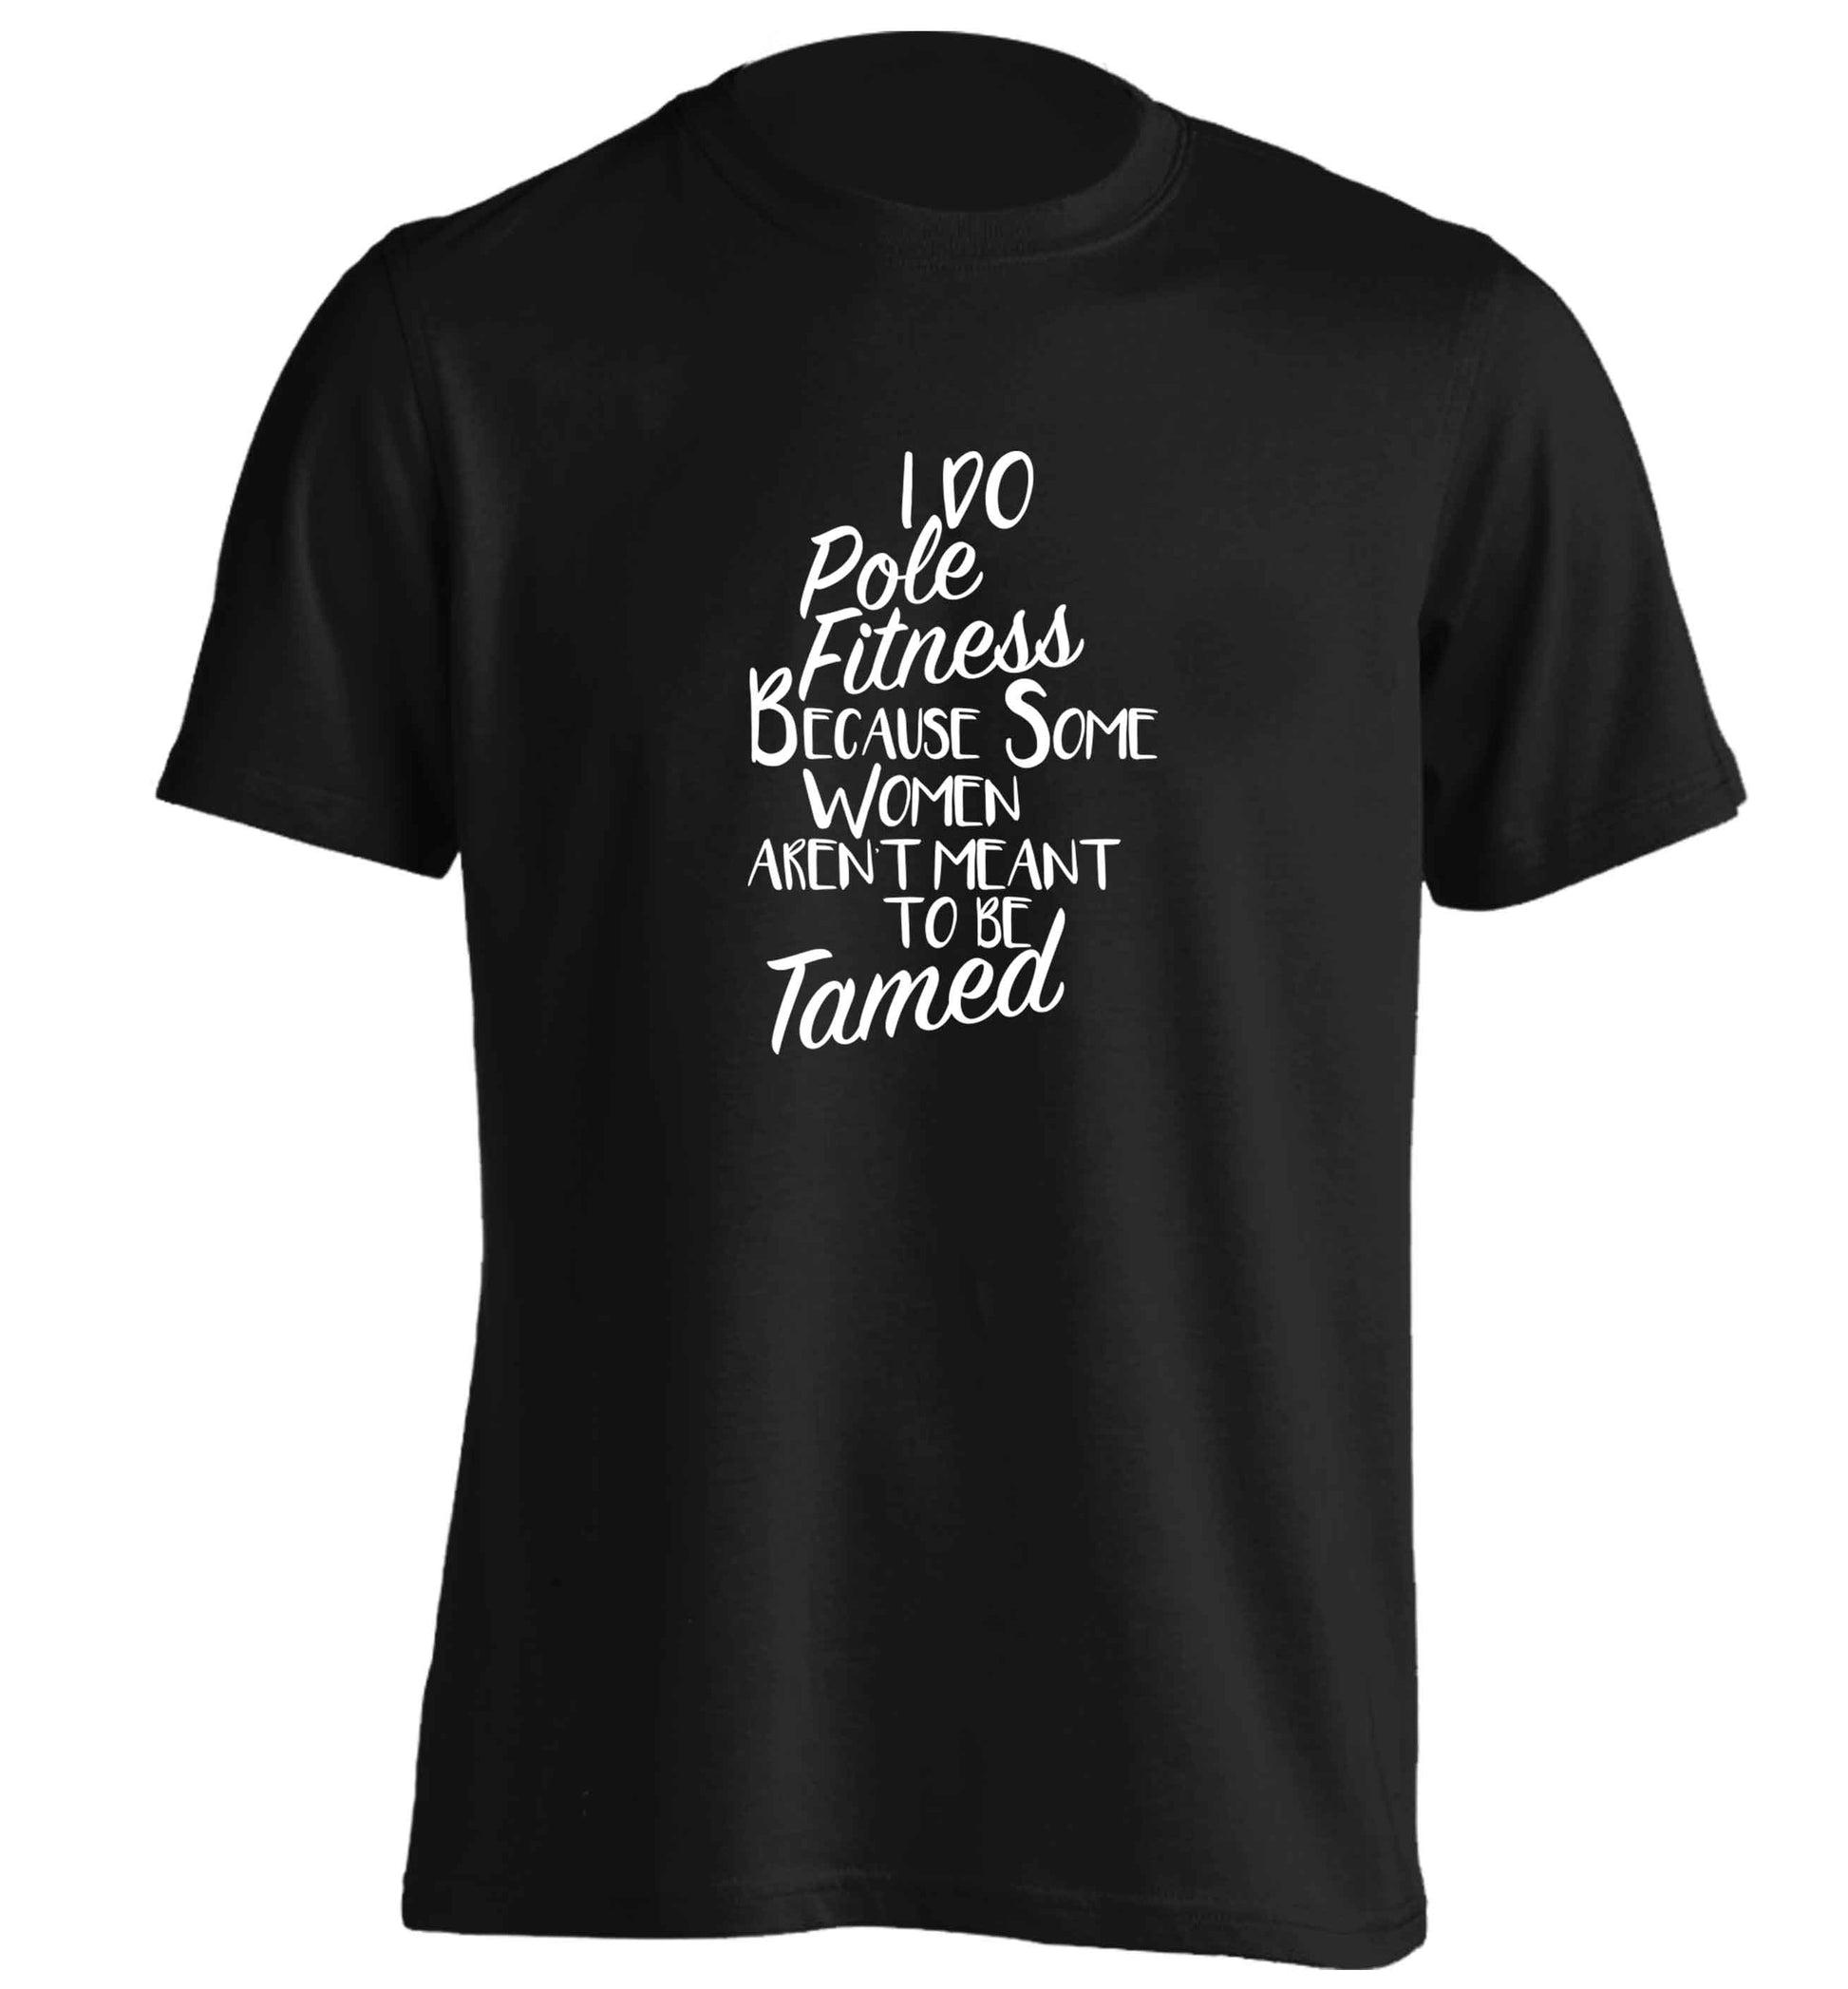 I do pole fitness because some women aren't meant to be tamed adults unisex black Tshirt 2XL